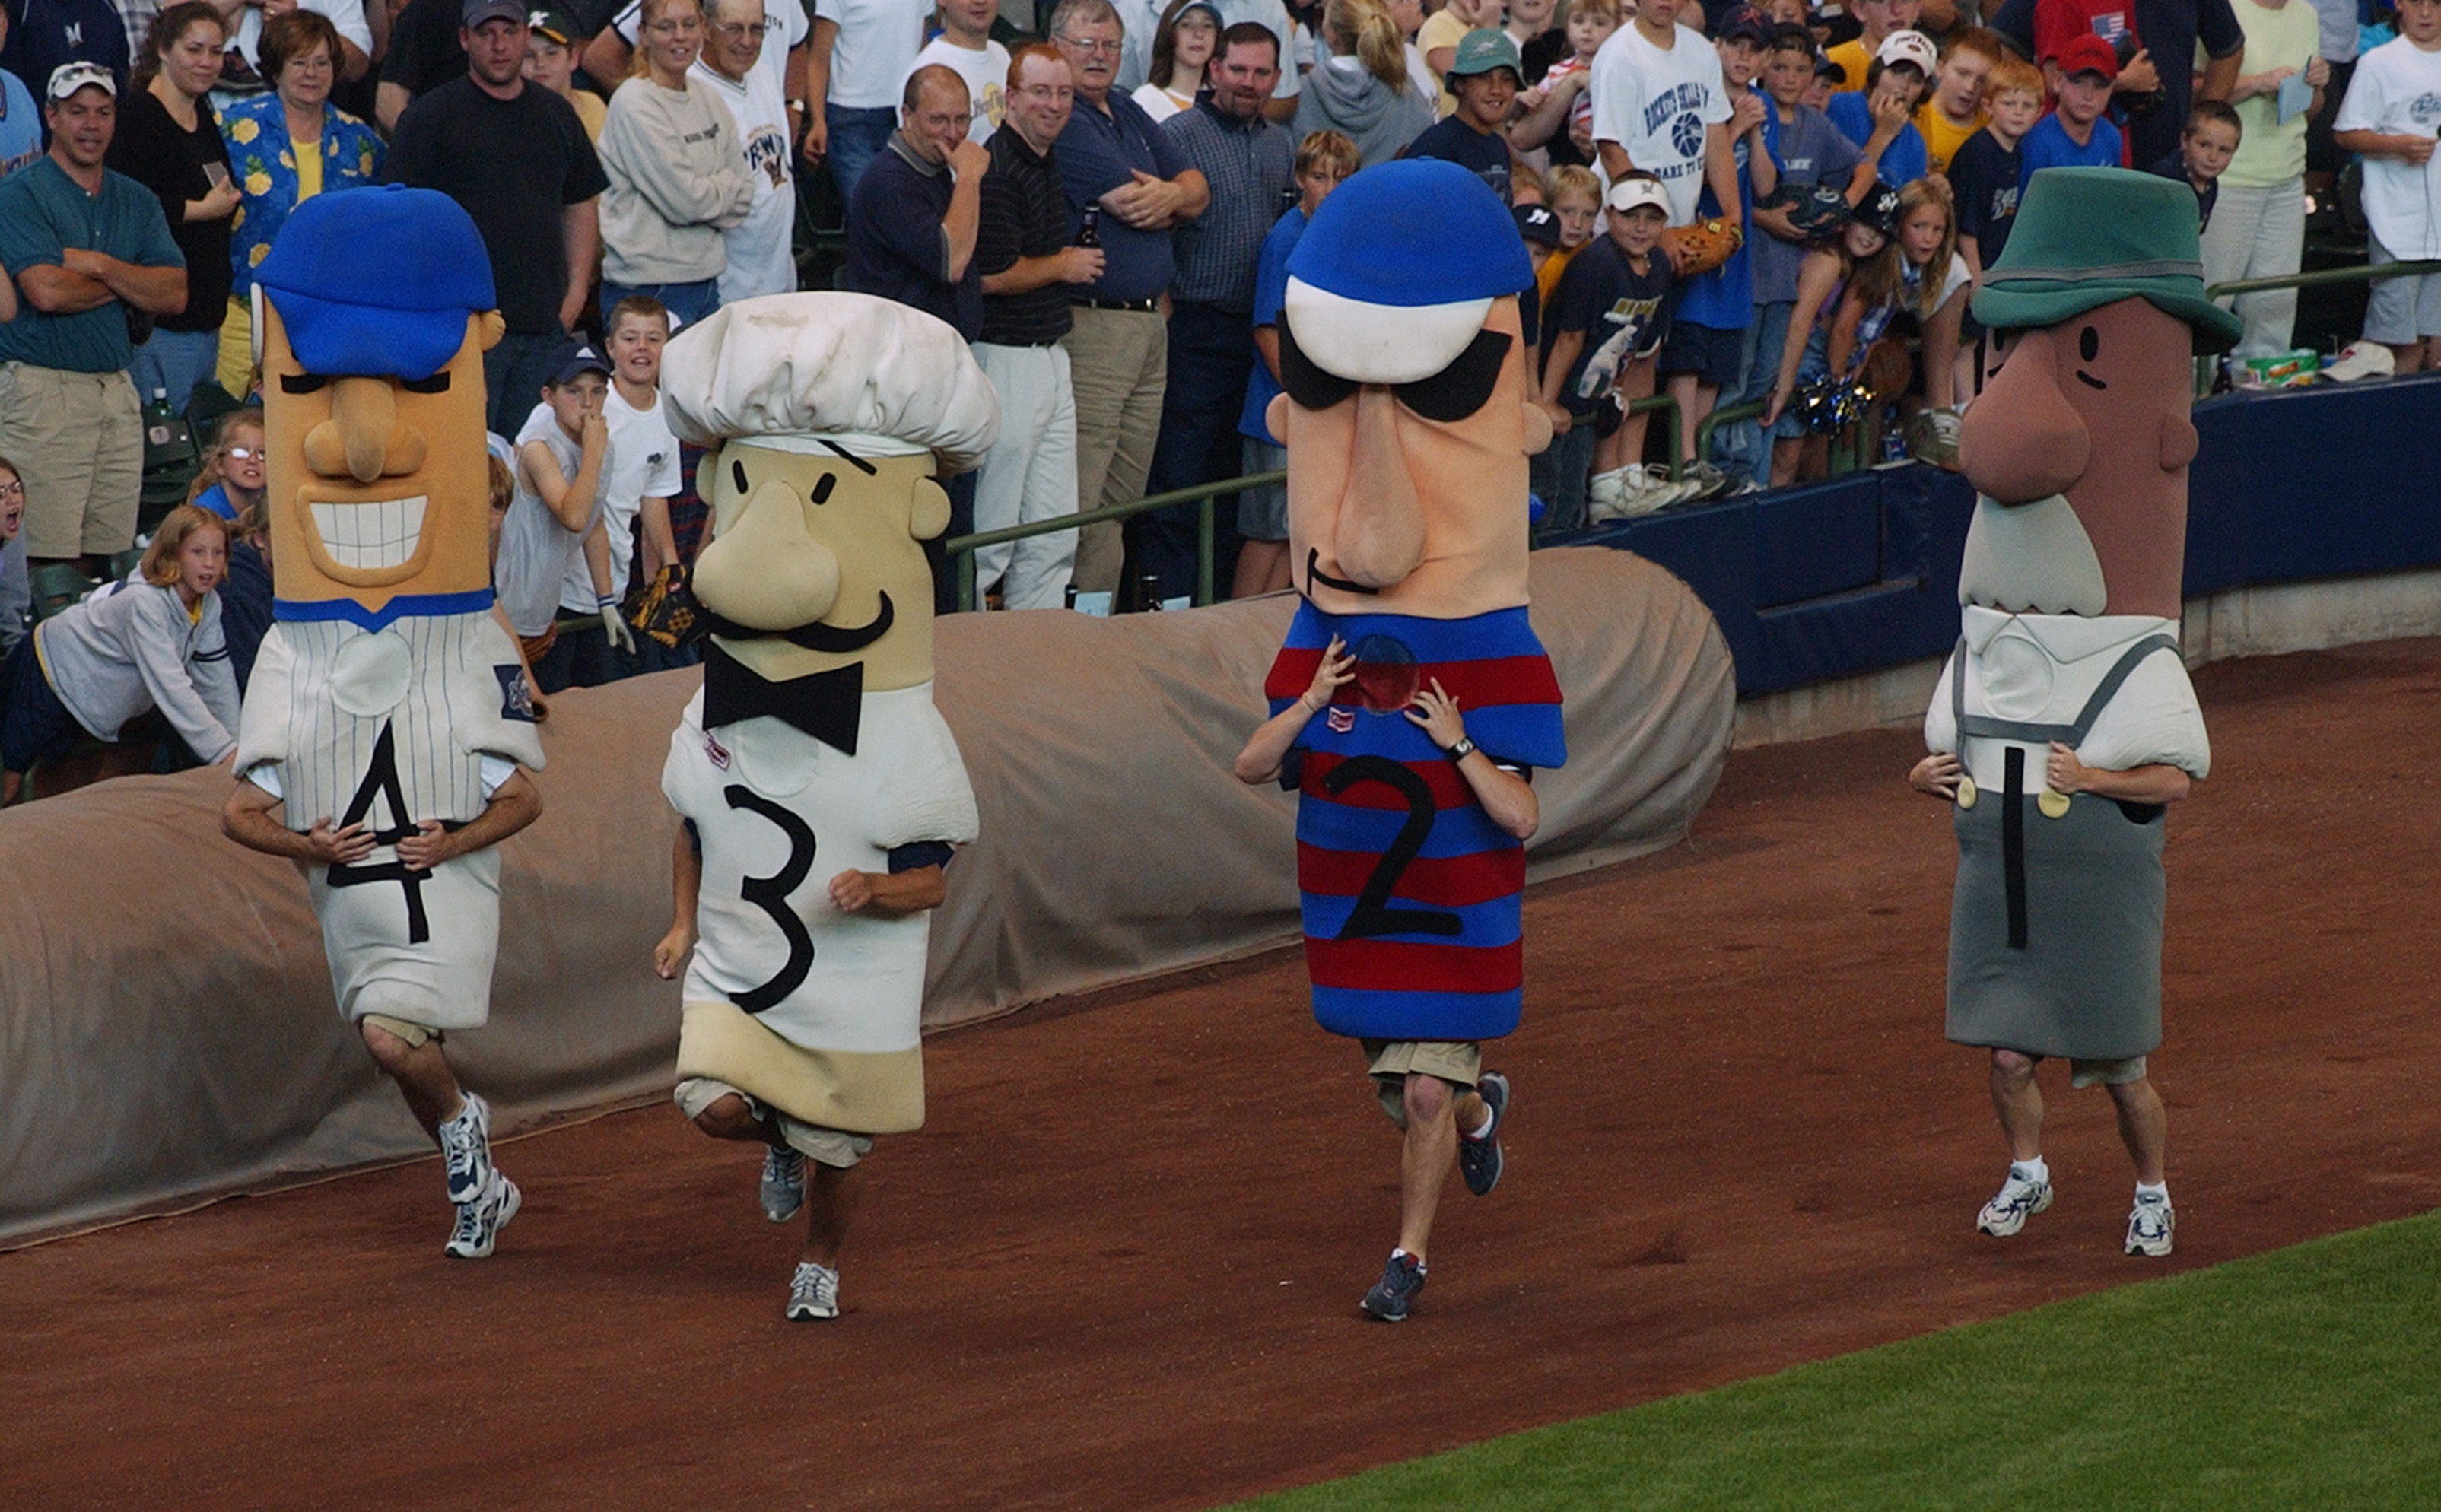 MILWAUKEE - JUNE 17:  A view of the Polish sausage, the Italian sausage, the Hot Dog, and the Bratwurst in the famous Sausage Race taken during the game between the Milwaukee Brewers and the Seattle Mariners on June 17, 2004 at Miller Park in Milwaukee, W